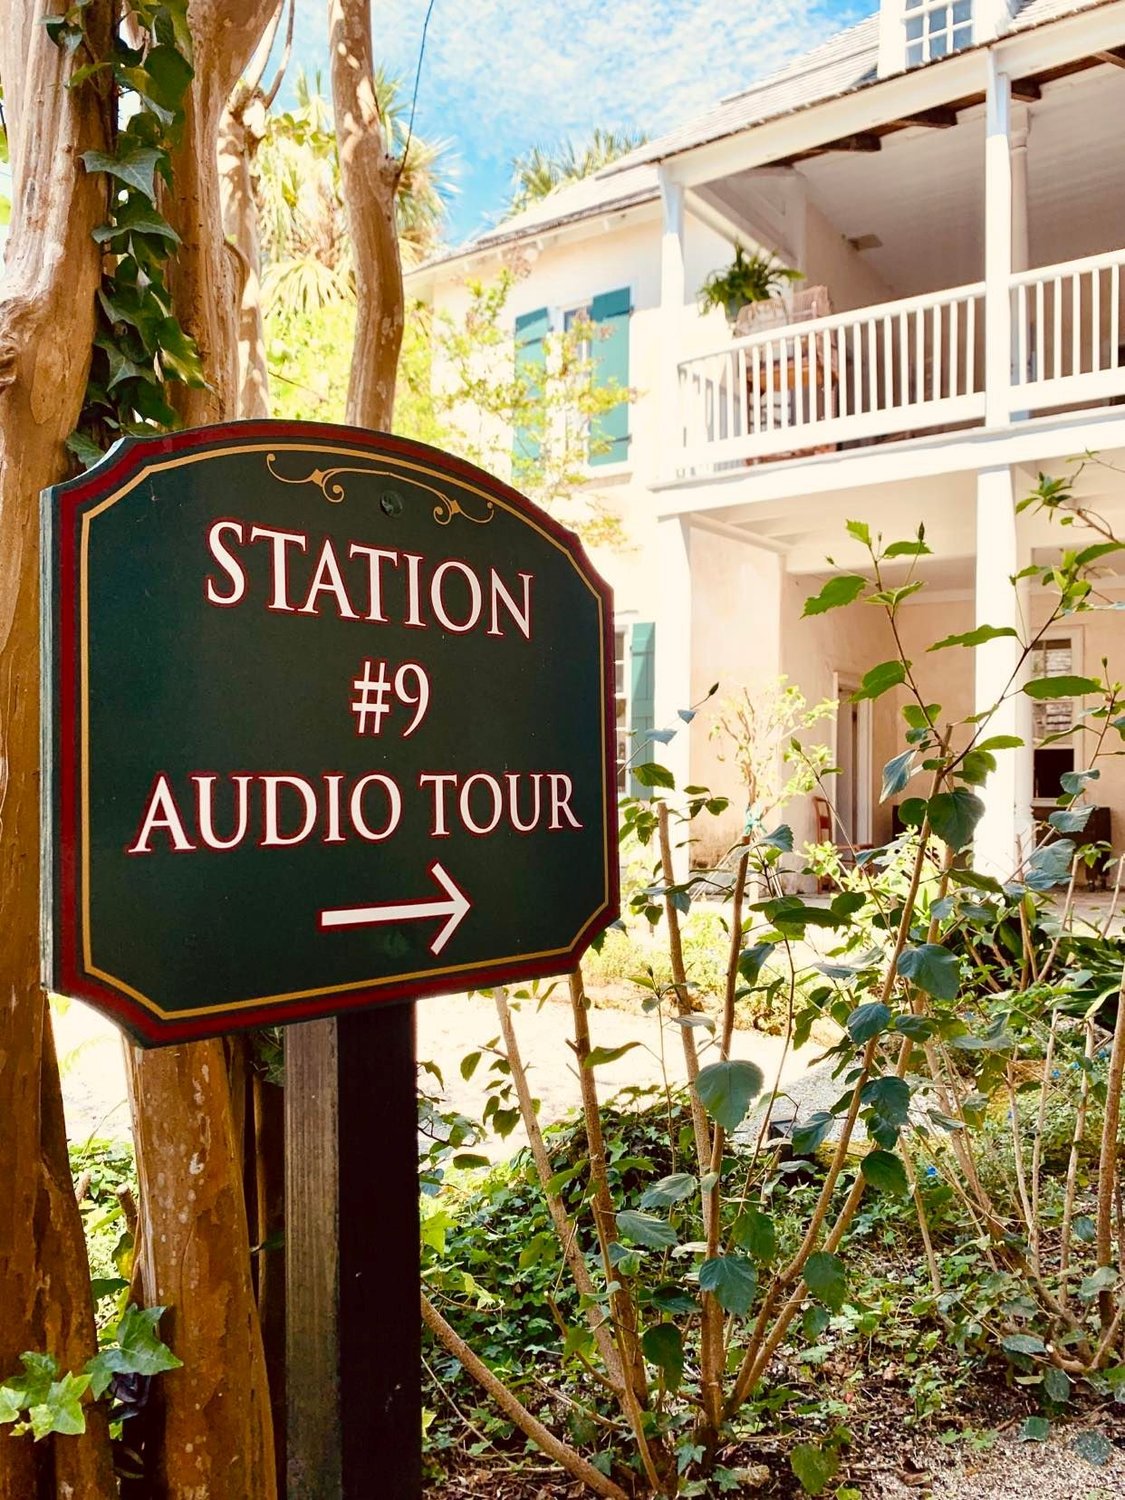 The Ximenez-Fatio House Museum offers guided and audio tours.